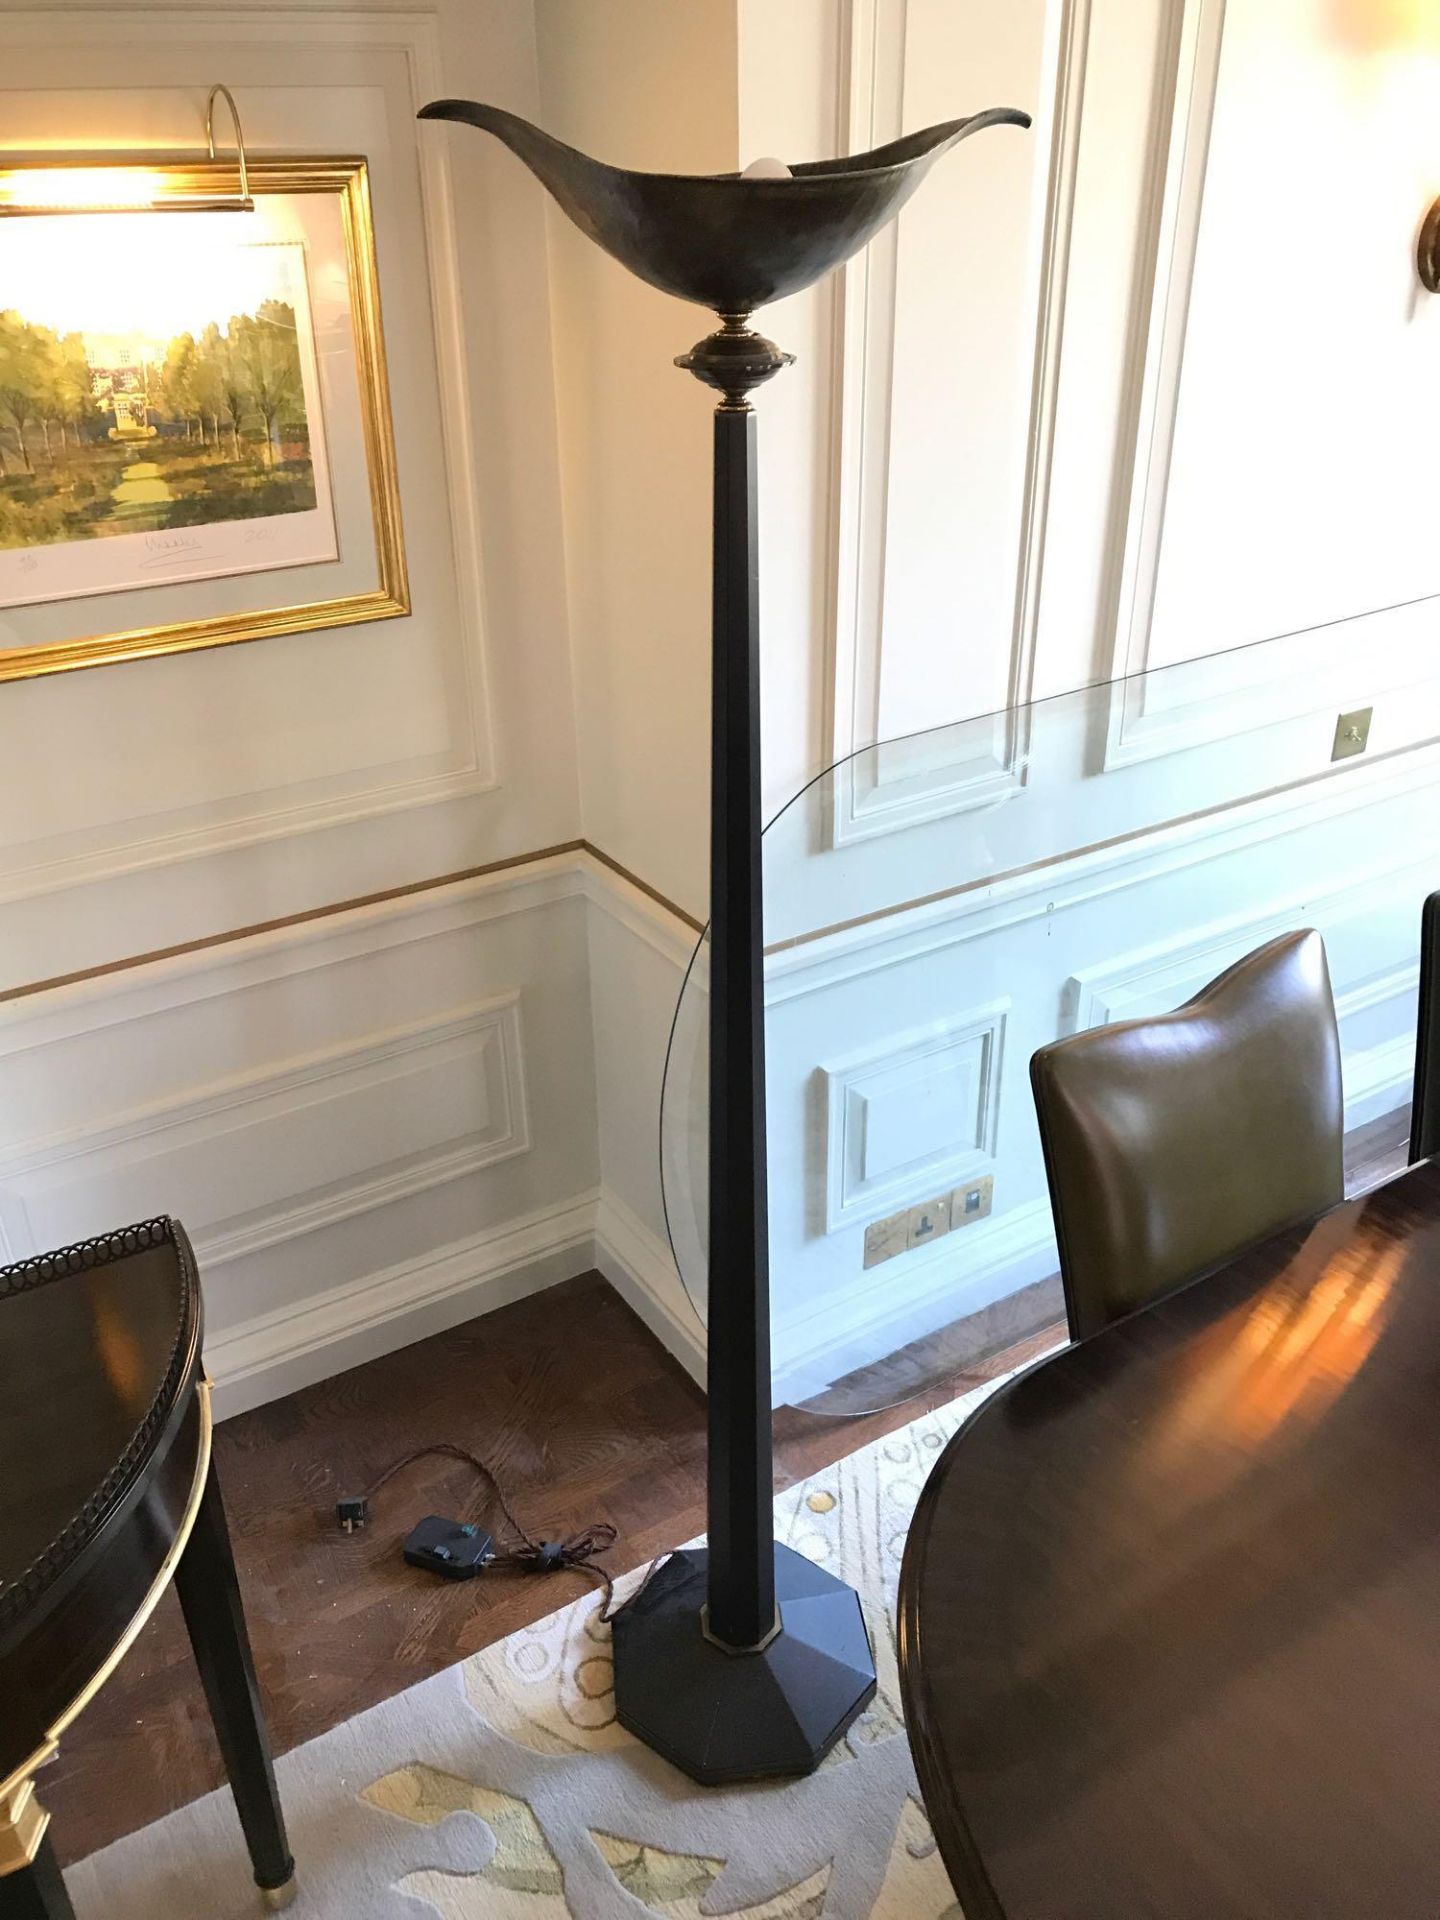 Heathfield And Co Torchiere Floor Lamp Black Column With Bowl Effect Metal Uplighter 173cm (Room